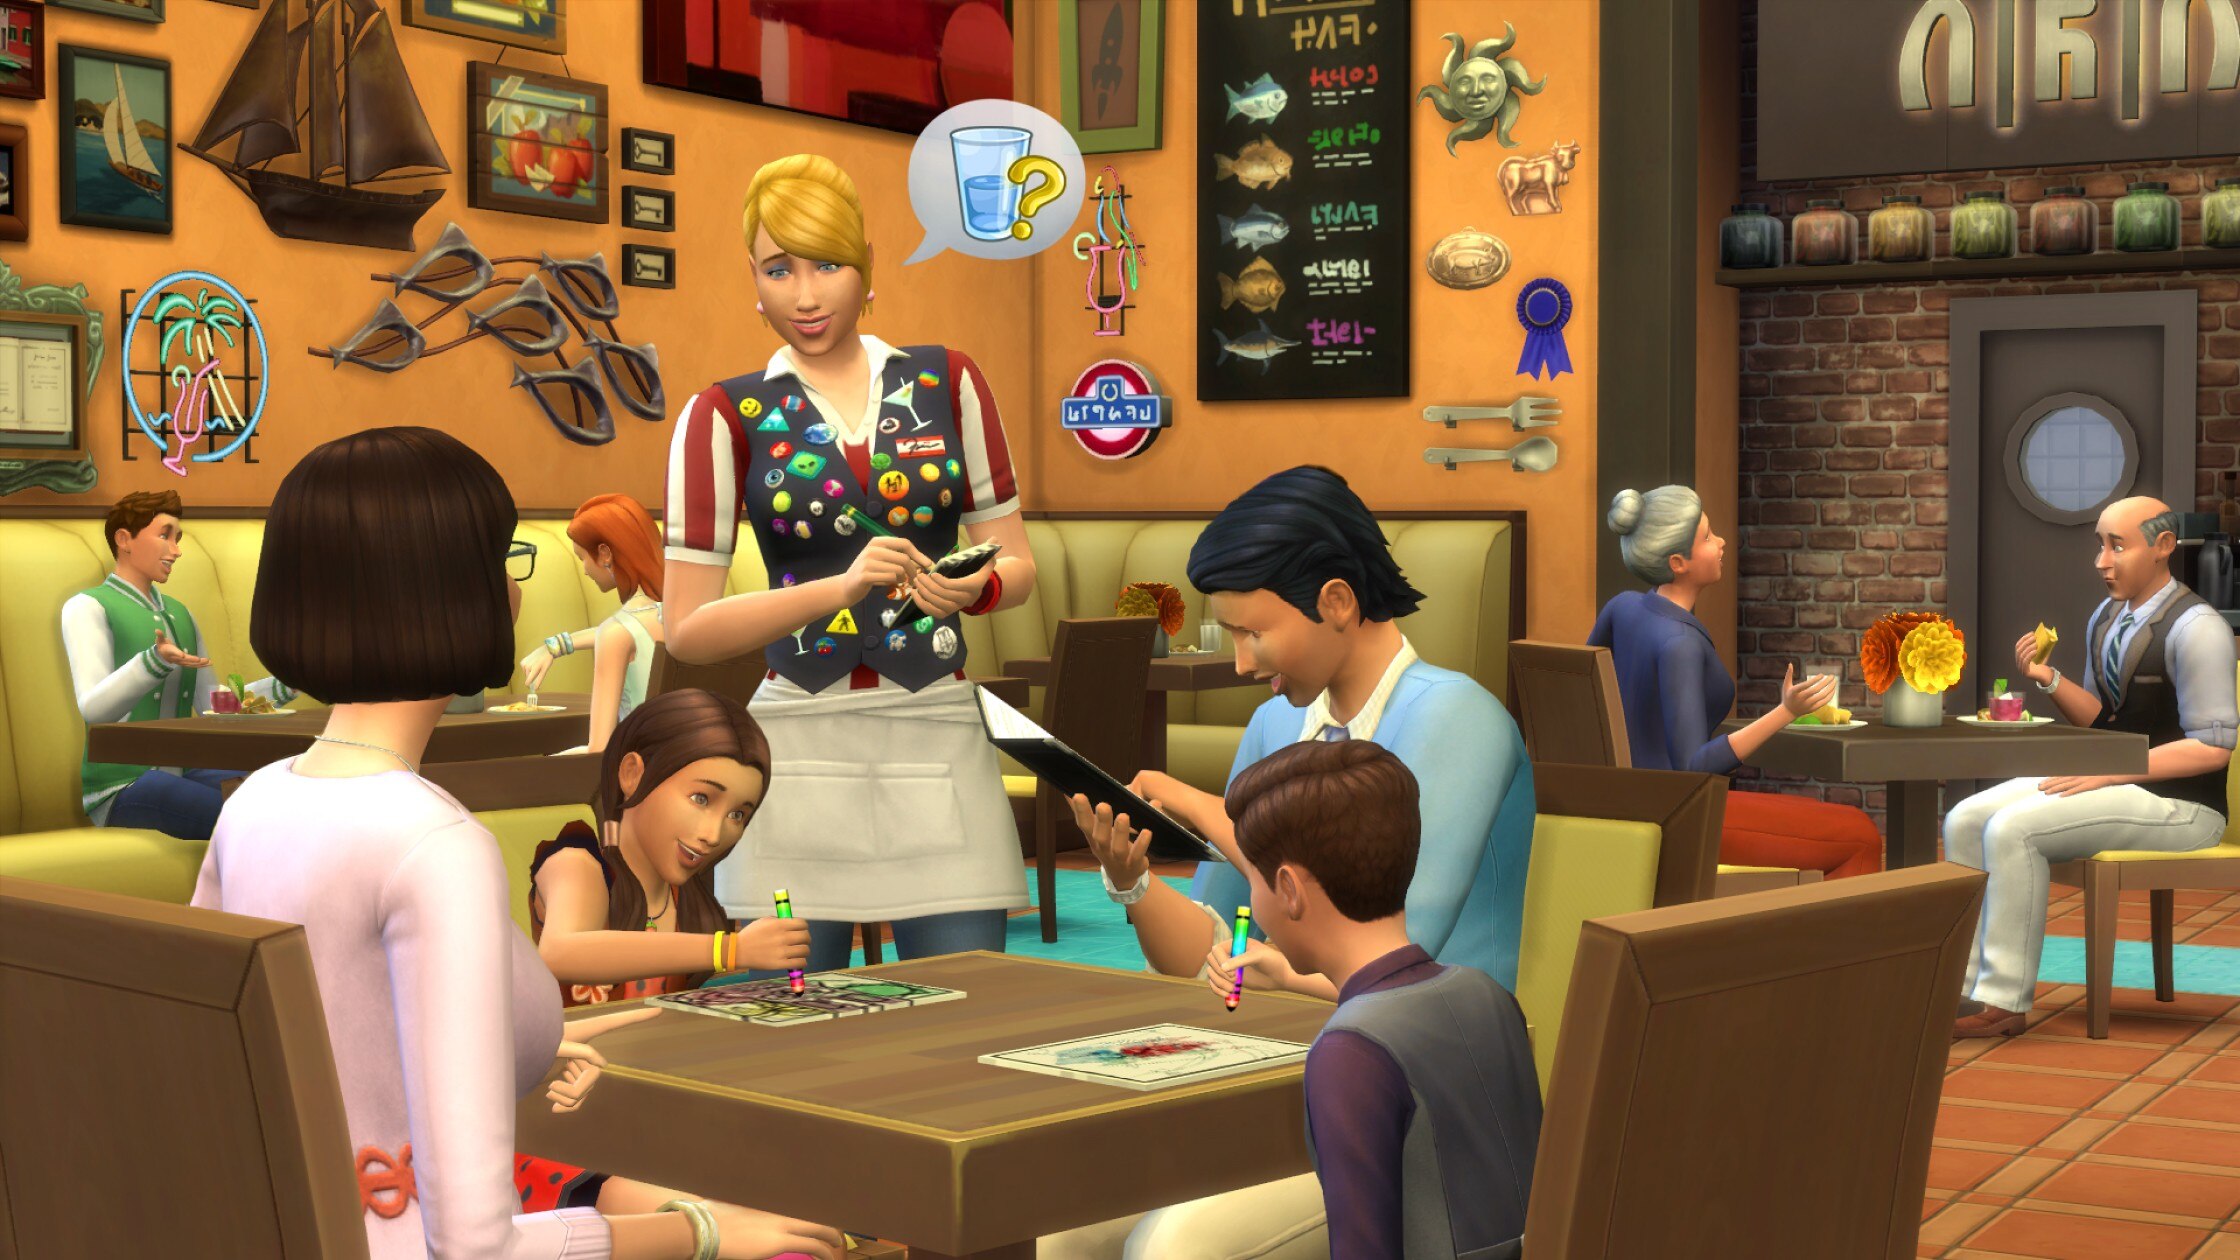 Last game sims. The SIMS™ 4: В ресторане. SIMS 4 dine out. SIMS 4 кафе. SIMS ps4.